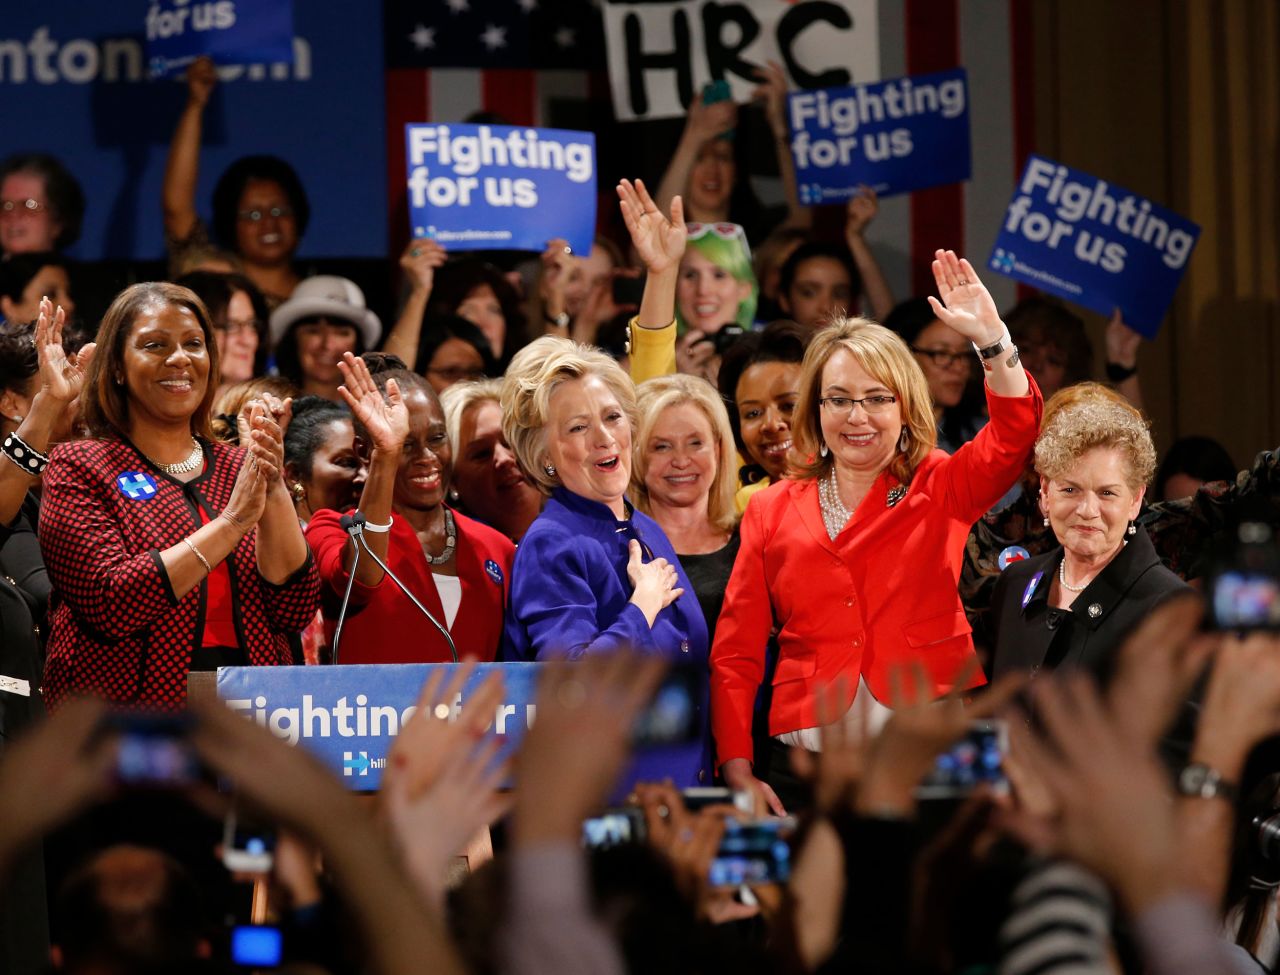 Giffords joins Democratic presidential candidate Hillary Clinton at a Women for Hillary event in New York City, one day before the New York primary in 2016.